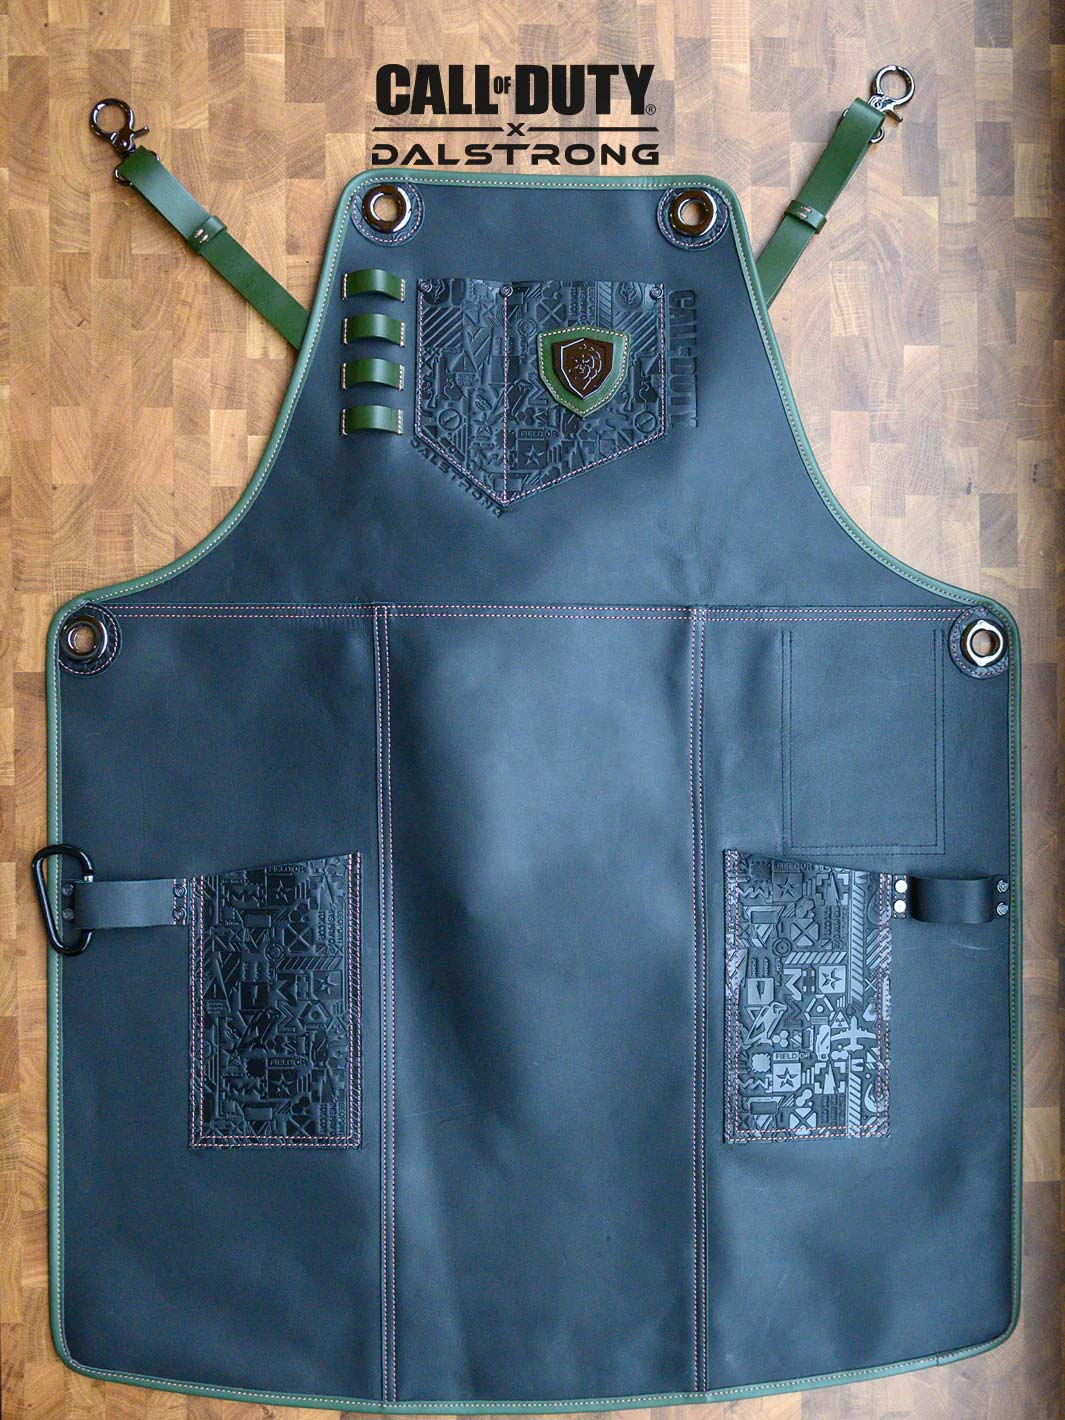 Dalstrong call of duty limited edition chef leather apron on a cutting board.